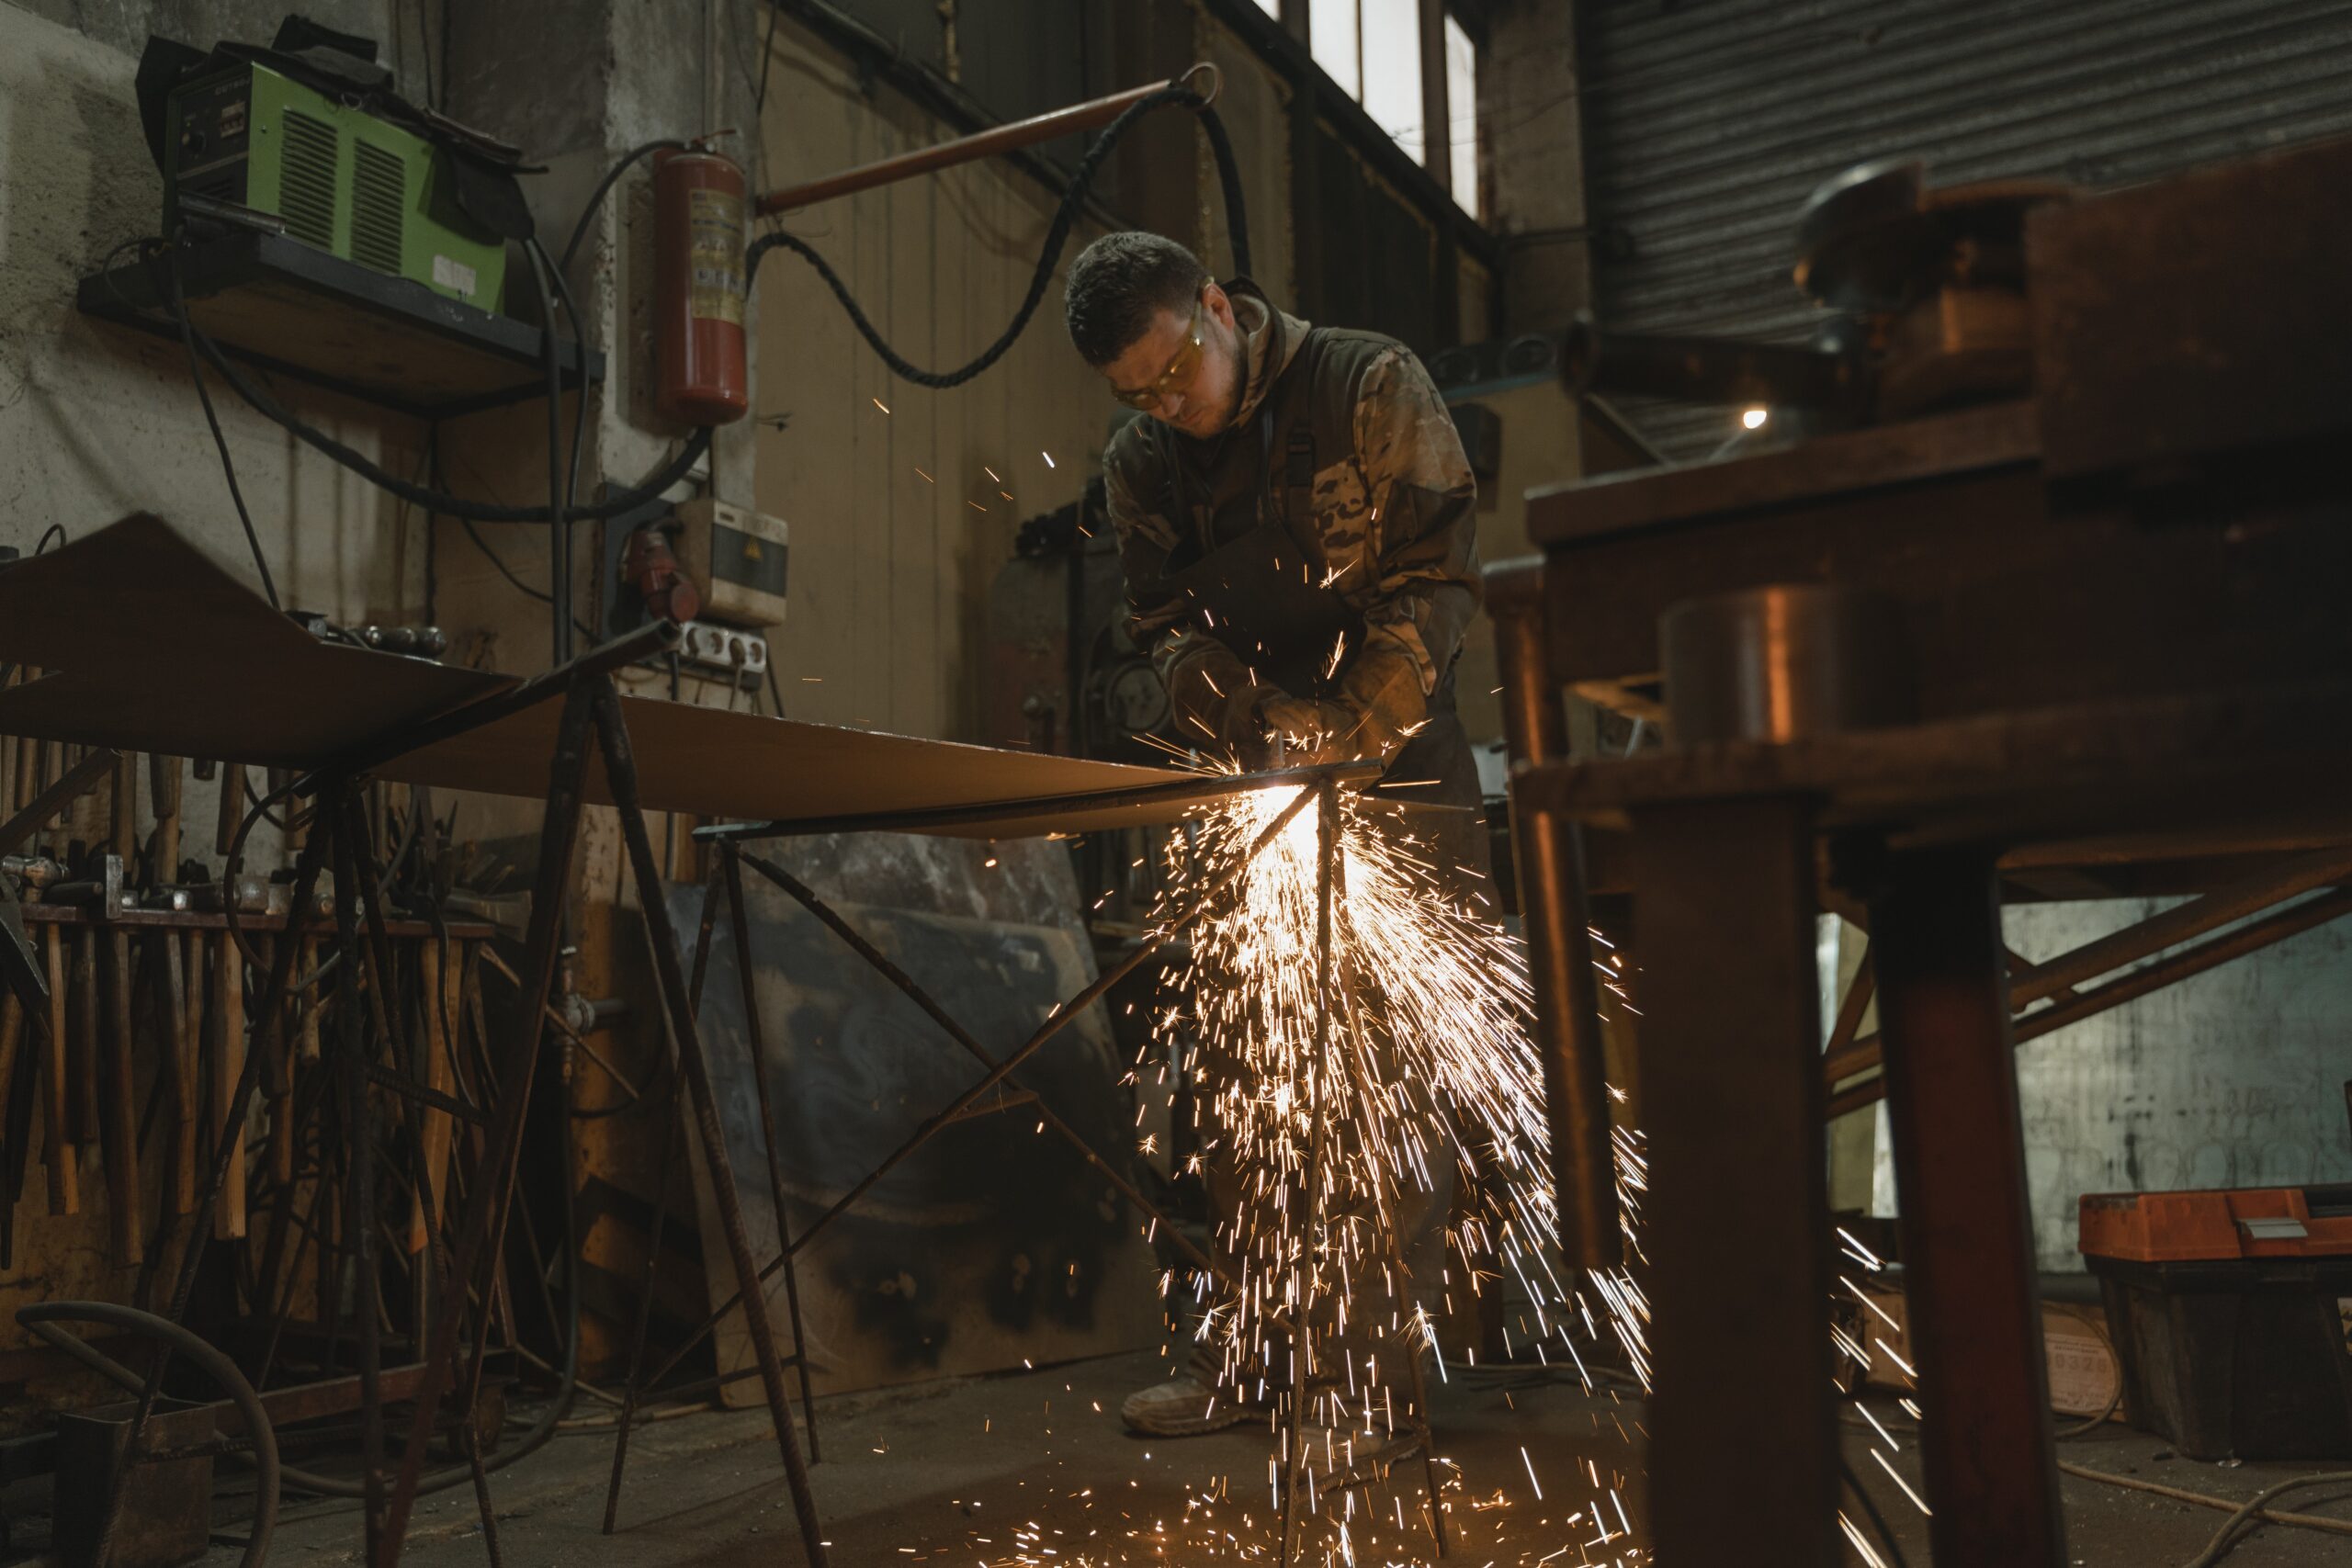 A man in safety glasses welding a metal bar